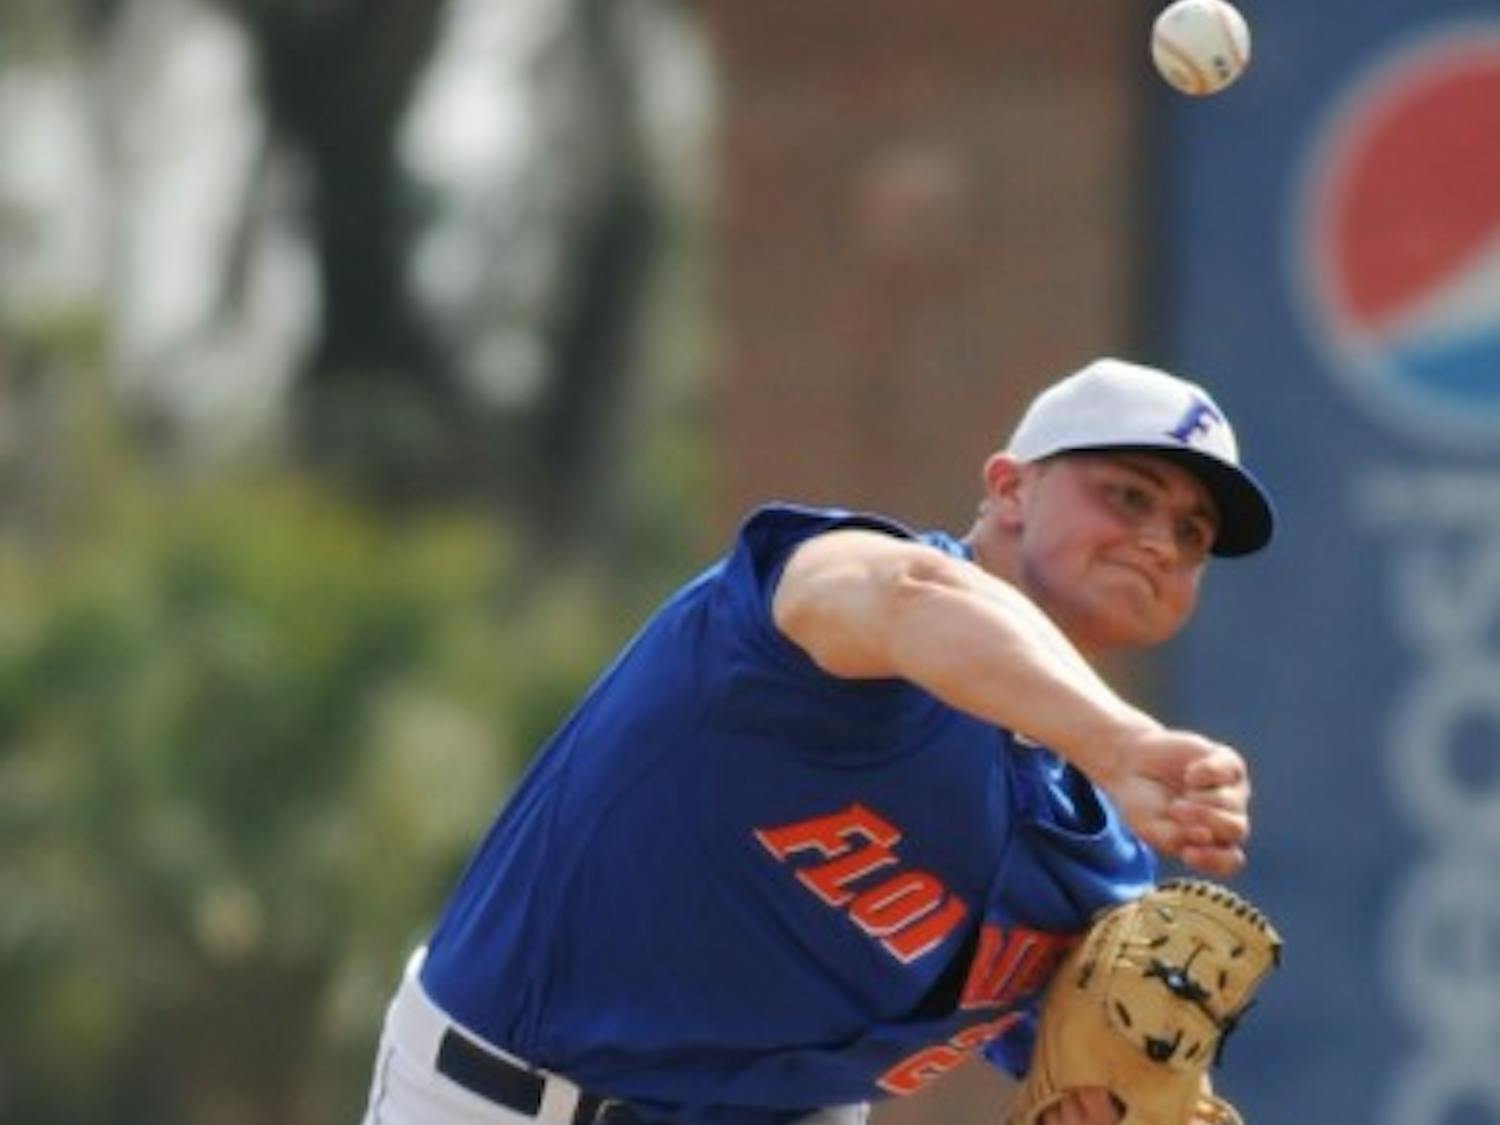 Karsten Whitson pitches during UF’s 5-0 win against USF on Feb. 20, 2011. Whitson missed the entire 2013 season after undergoing shoulder surgery in February 2013.